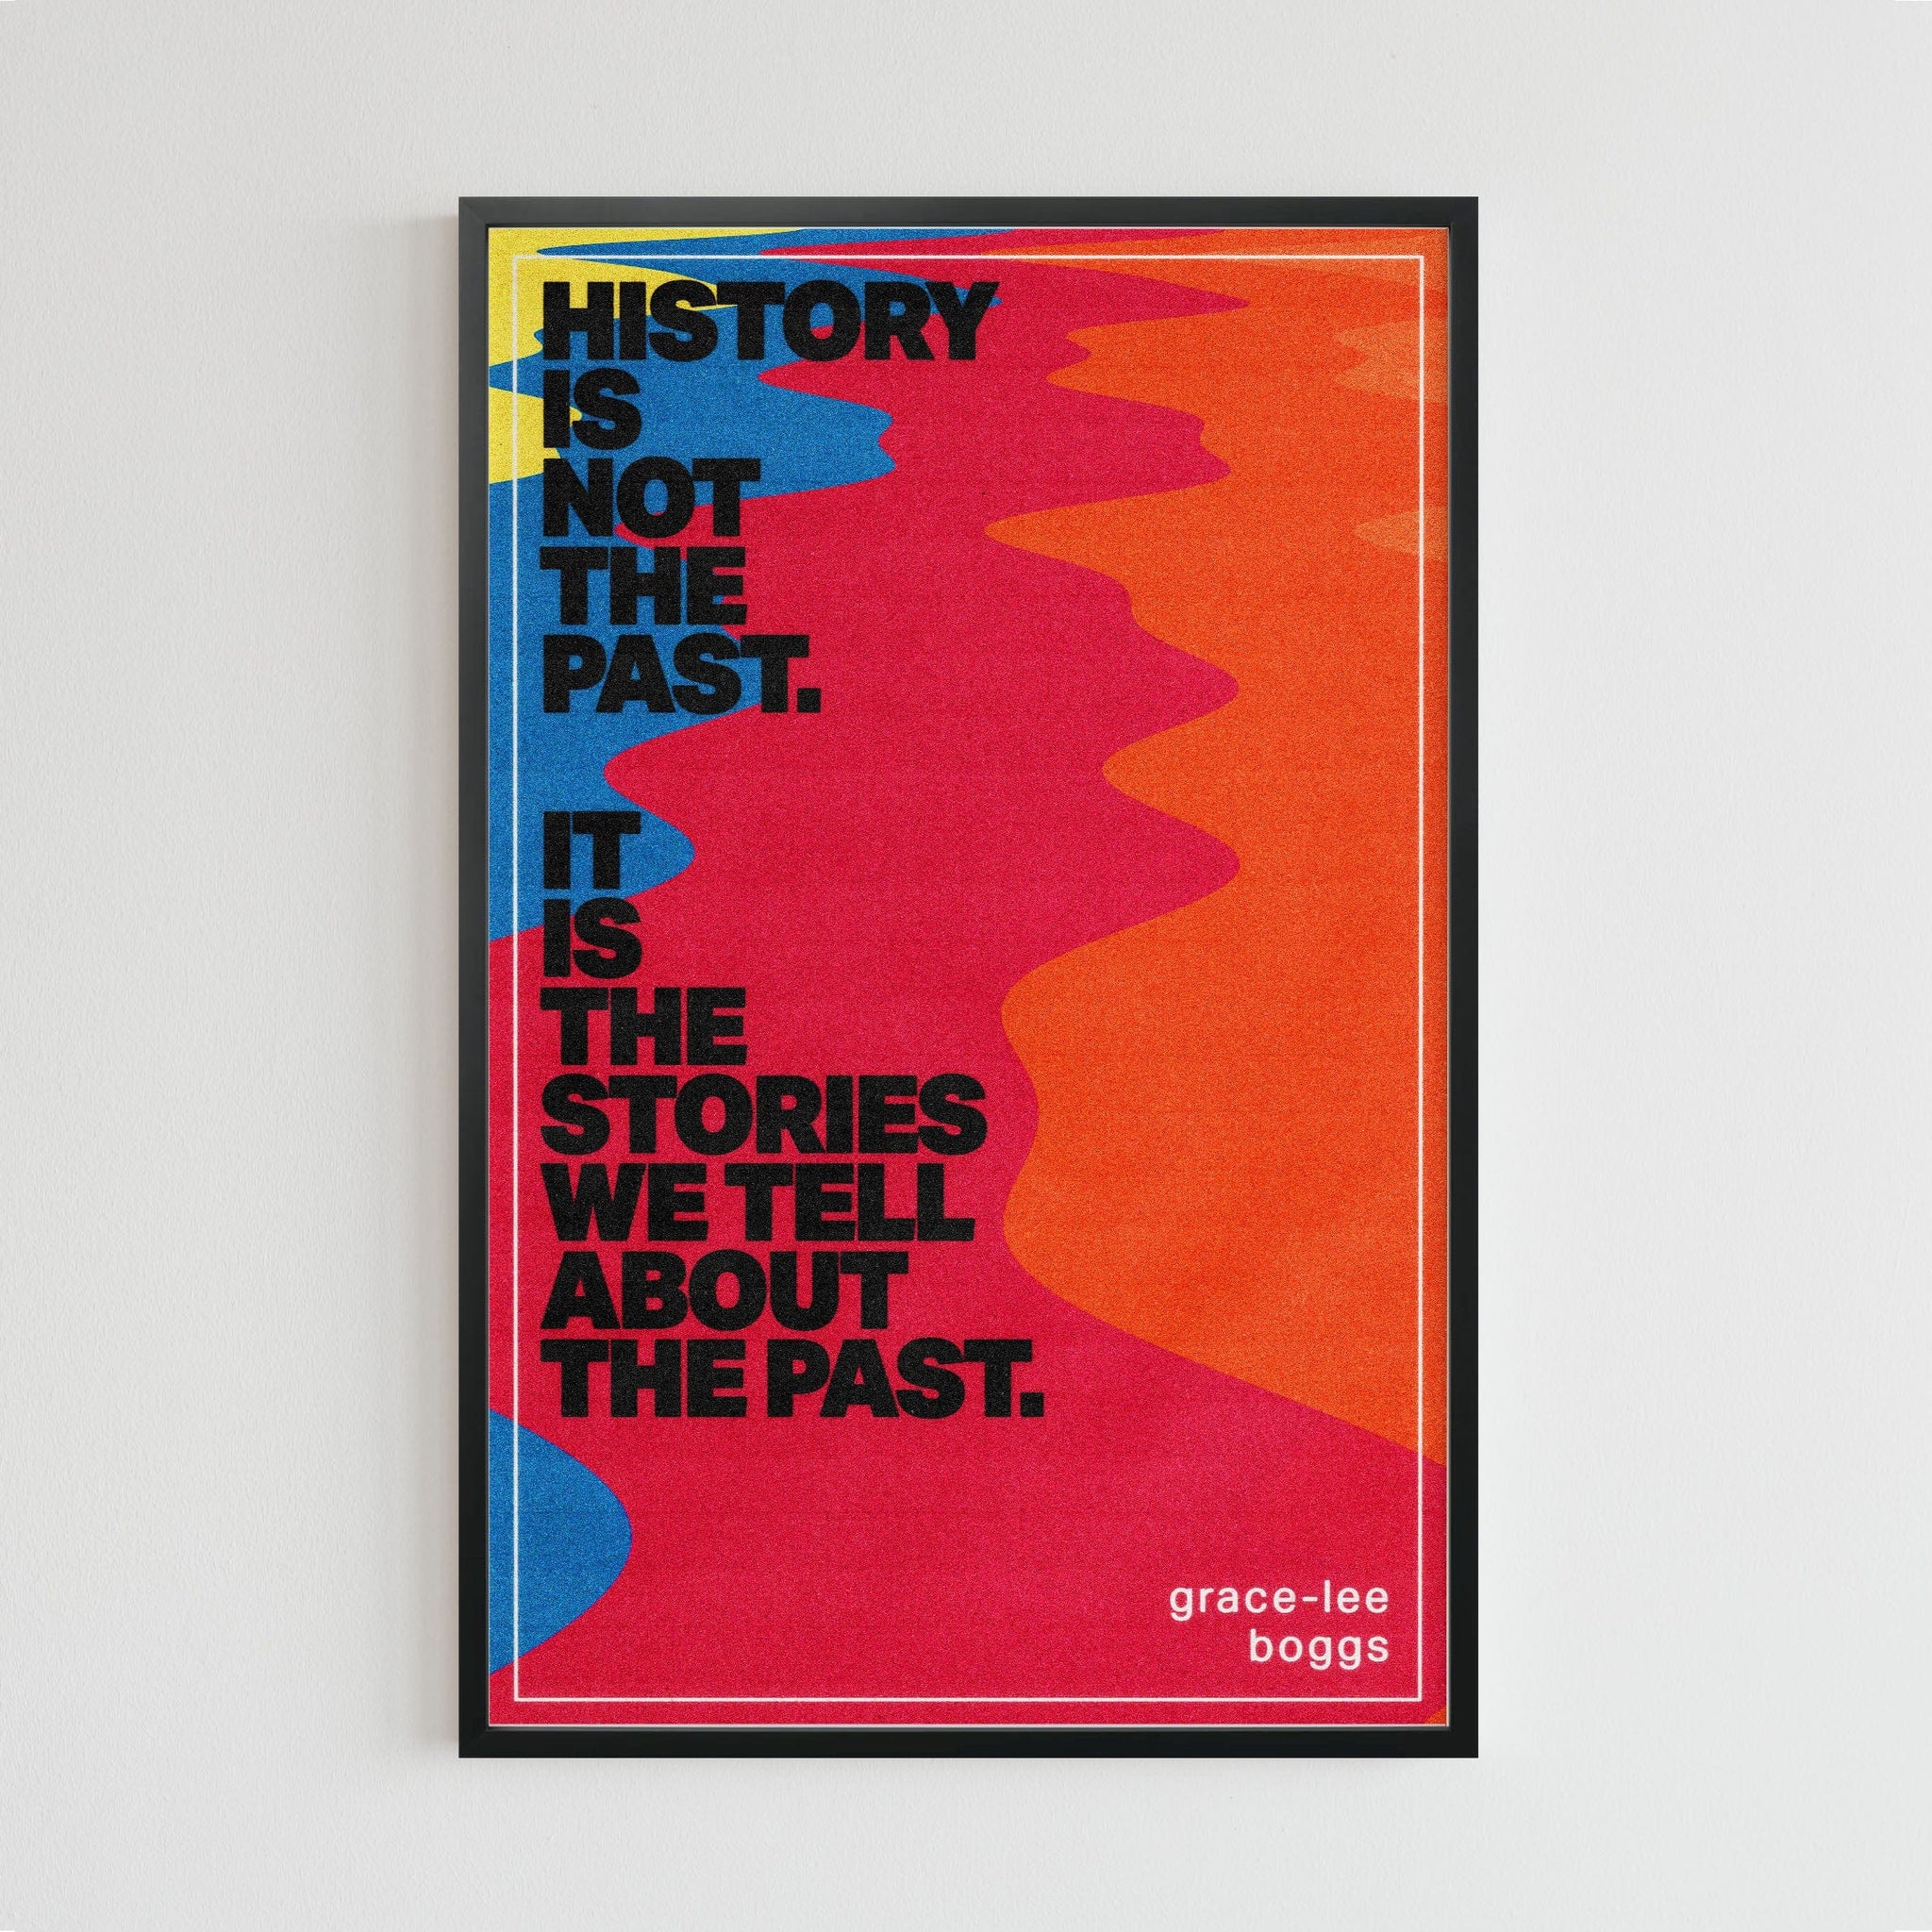 Grace Lee Boggs (quote)(11 x 17 Poster print)